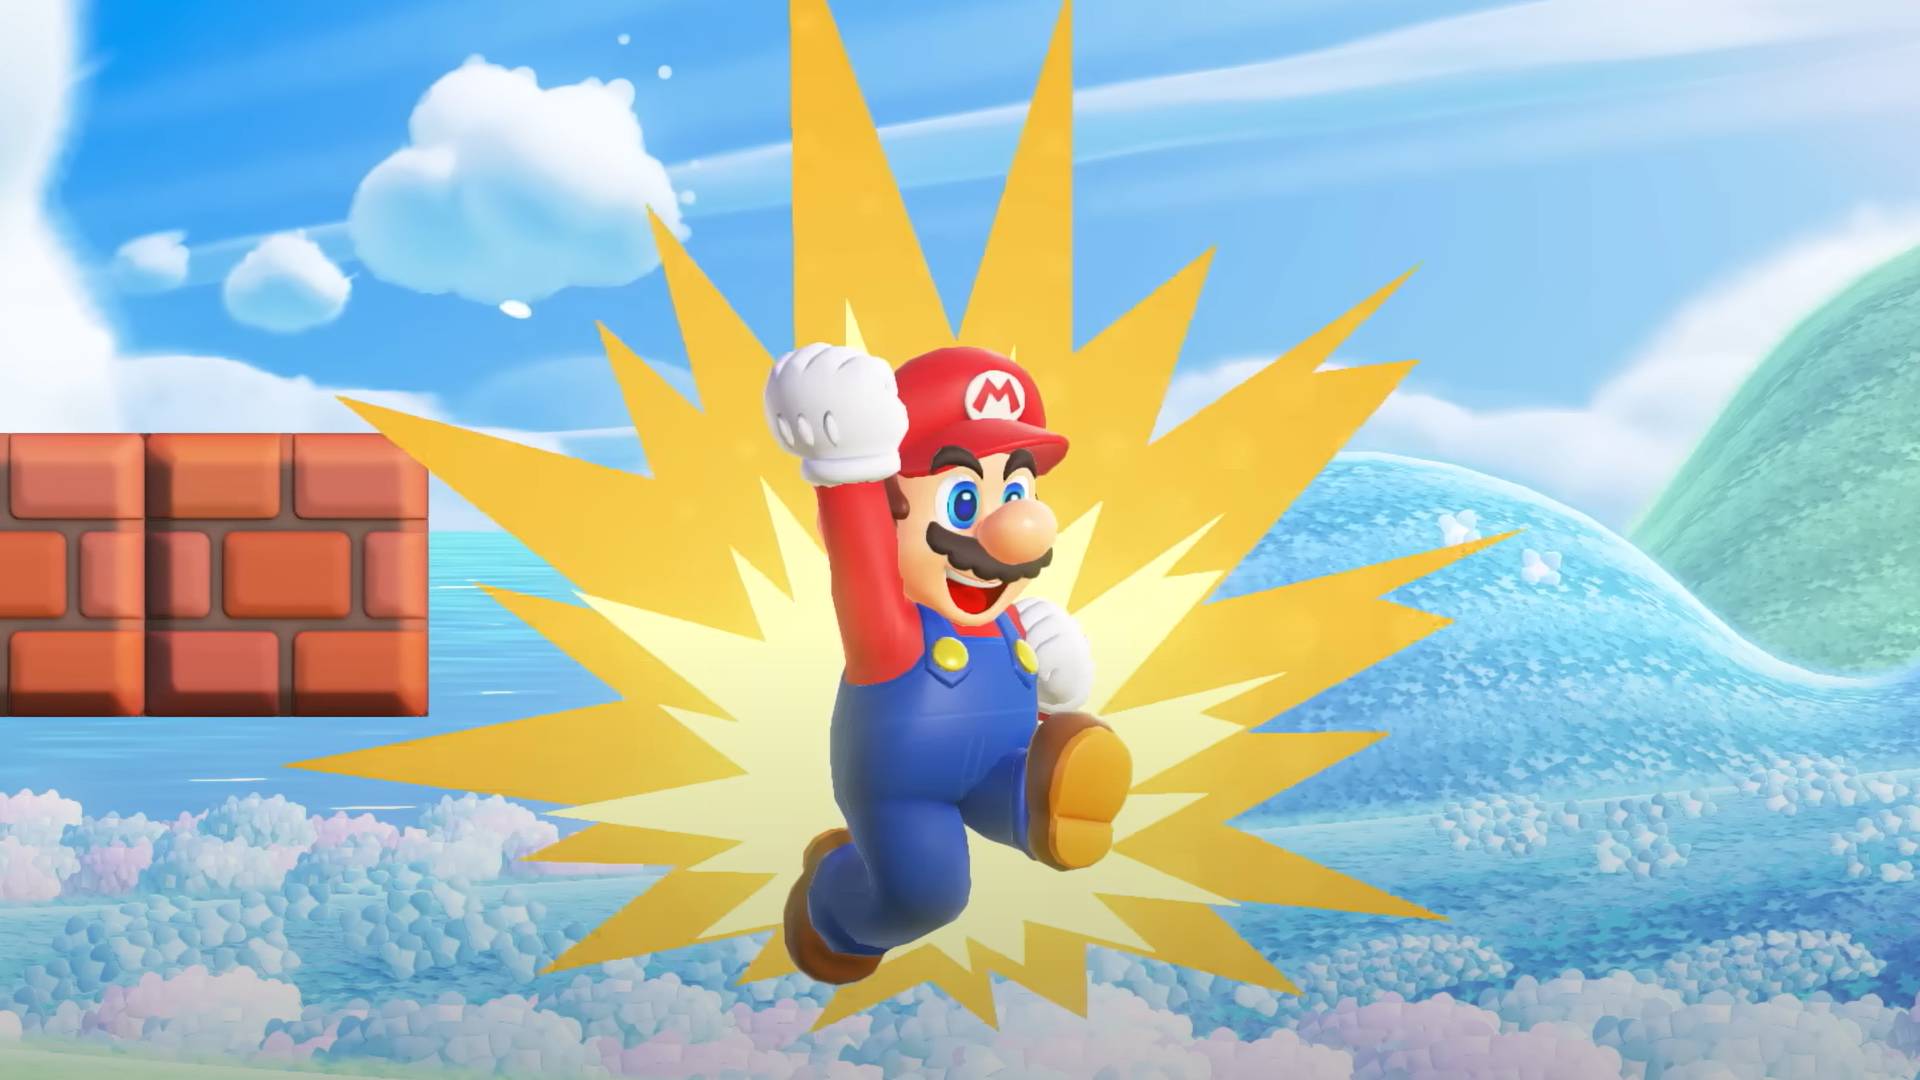 Everything we learned from today's brief Super Mario Bros. Wonder